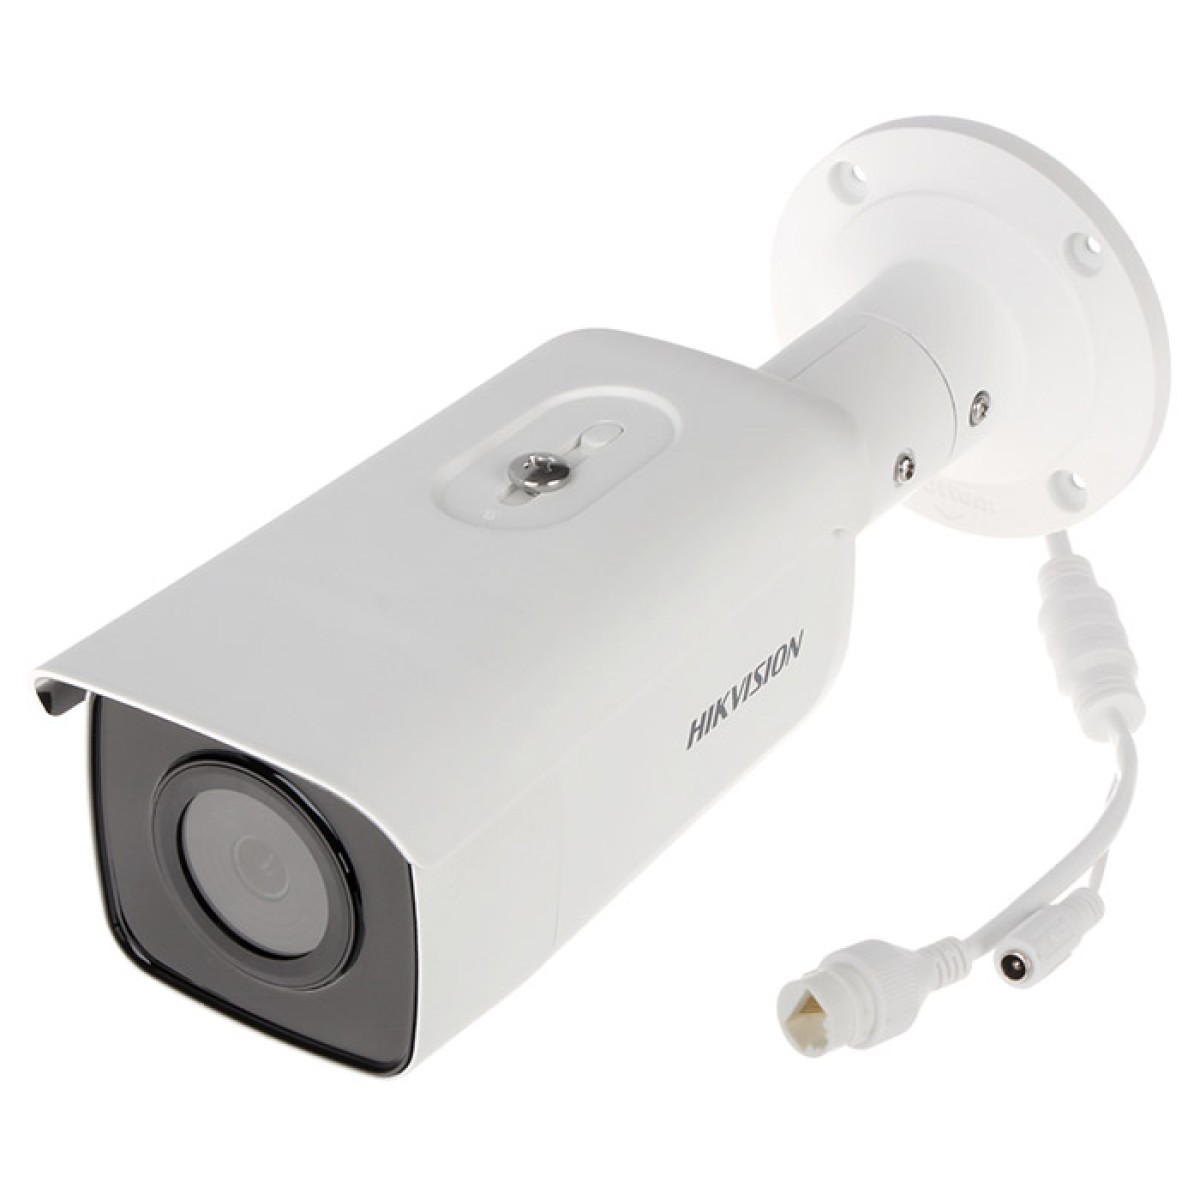 IP-камера Hikvision DS-2CD2T26G1-4I (4.0) 98_98.jpg - фото 2